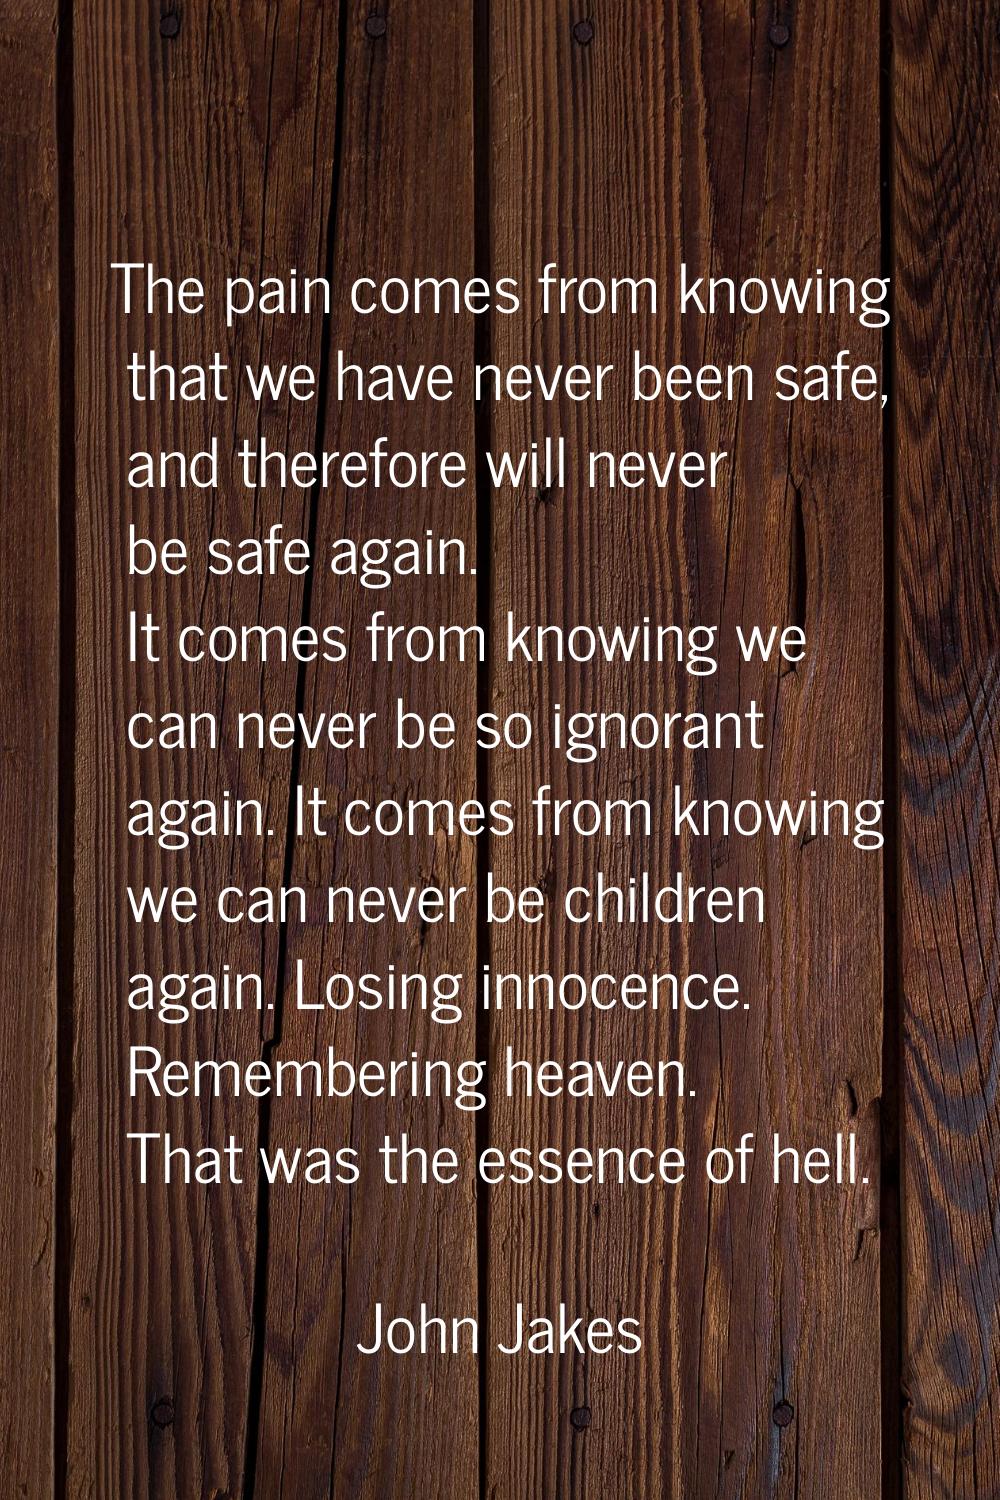 The pain comes from knowing that we have never been safe, and therefore will never be safe again. I